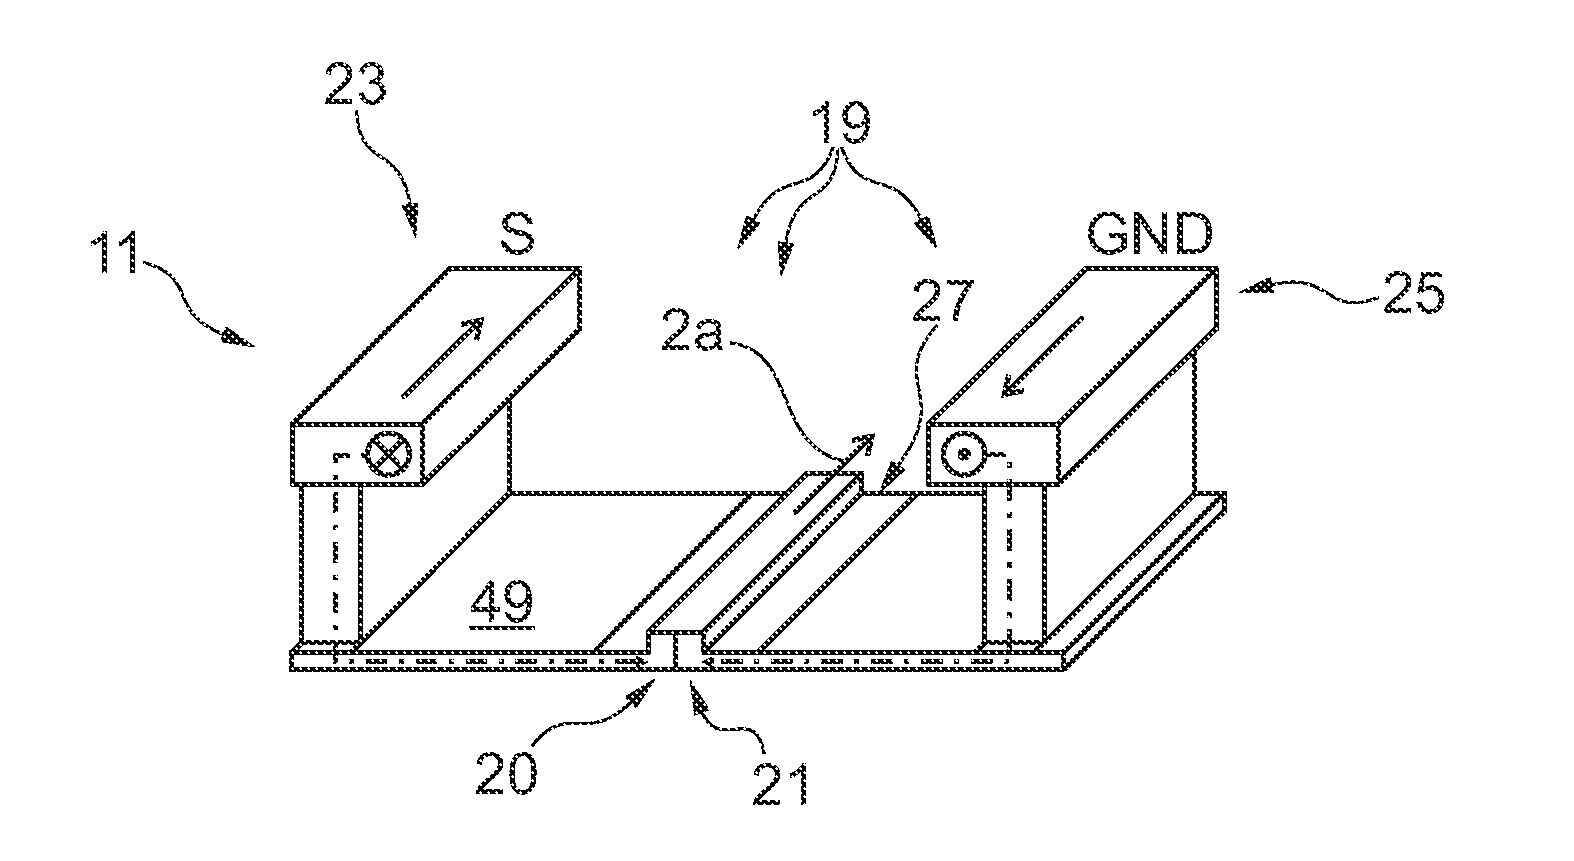 Electro-optical modulator based on carrier depletion or carrier accumulation in semiconductors with advanced electrode configuration